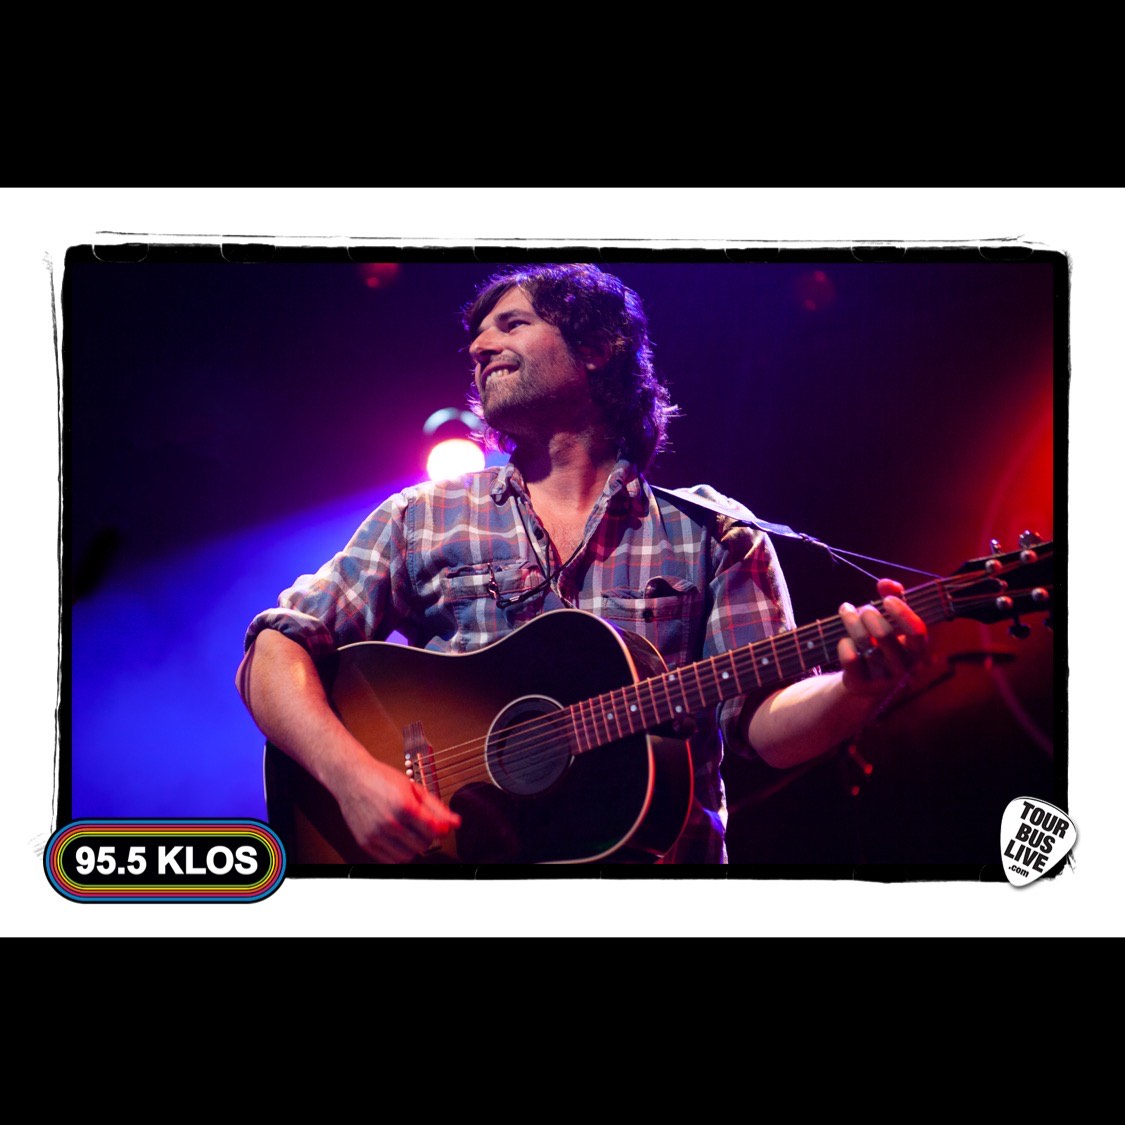 Happy birthday Pete Yorn, the master songwriter of his generation! : 